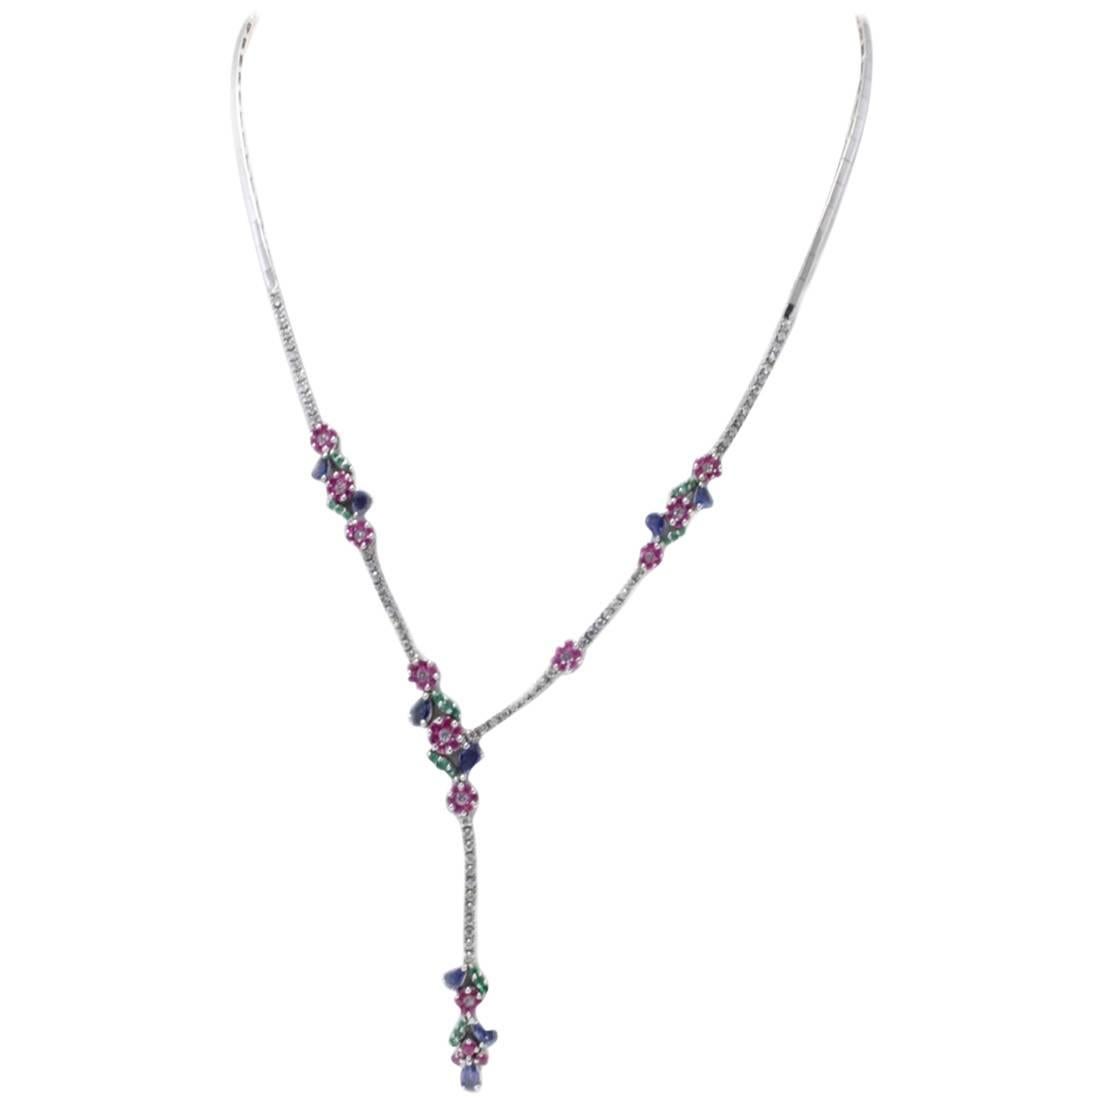 1.36 ct Diamonds, 4.33 ct Rubies Emeralds Blue Sapphires 18K White Gold Necklace